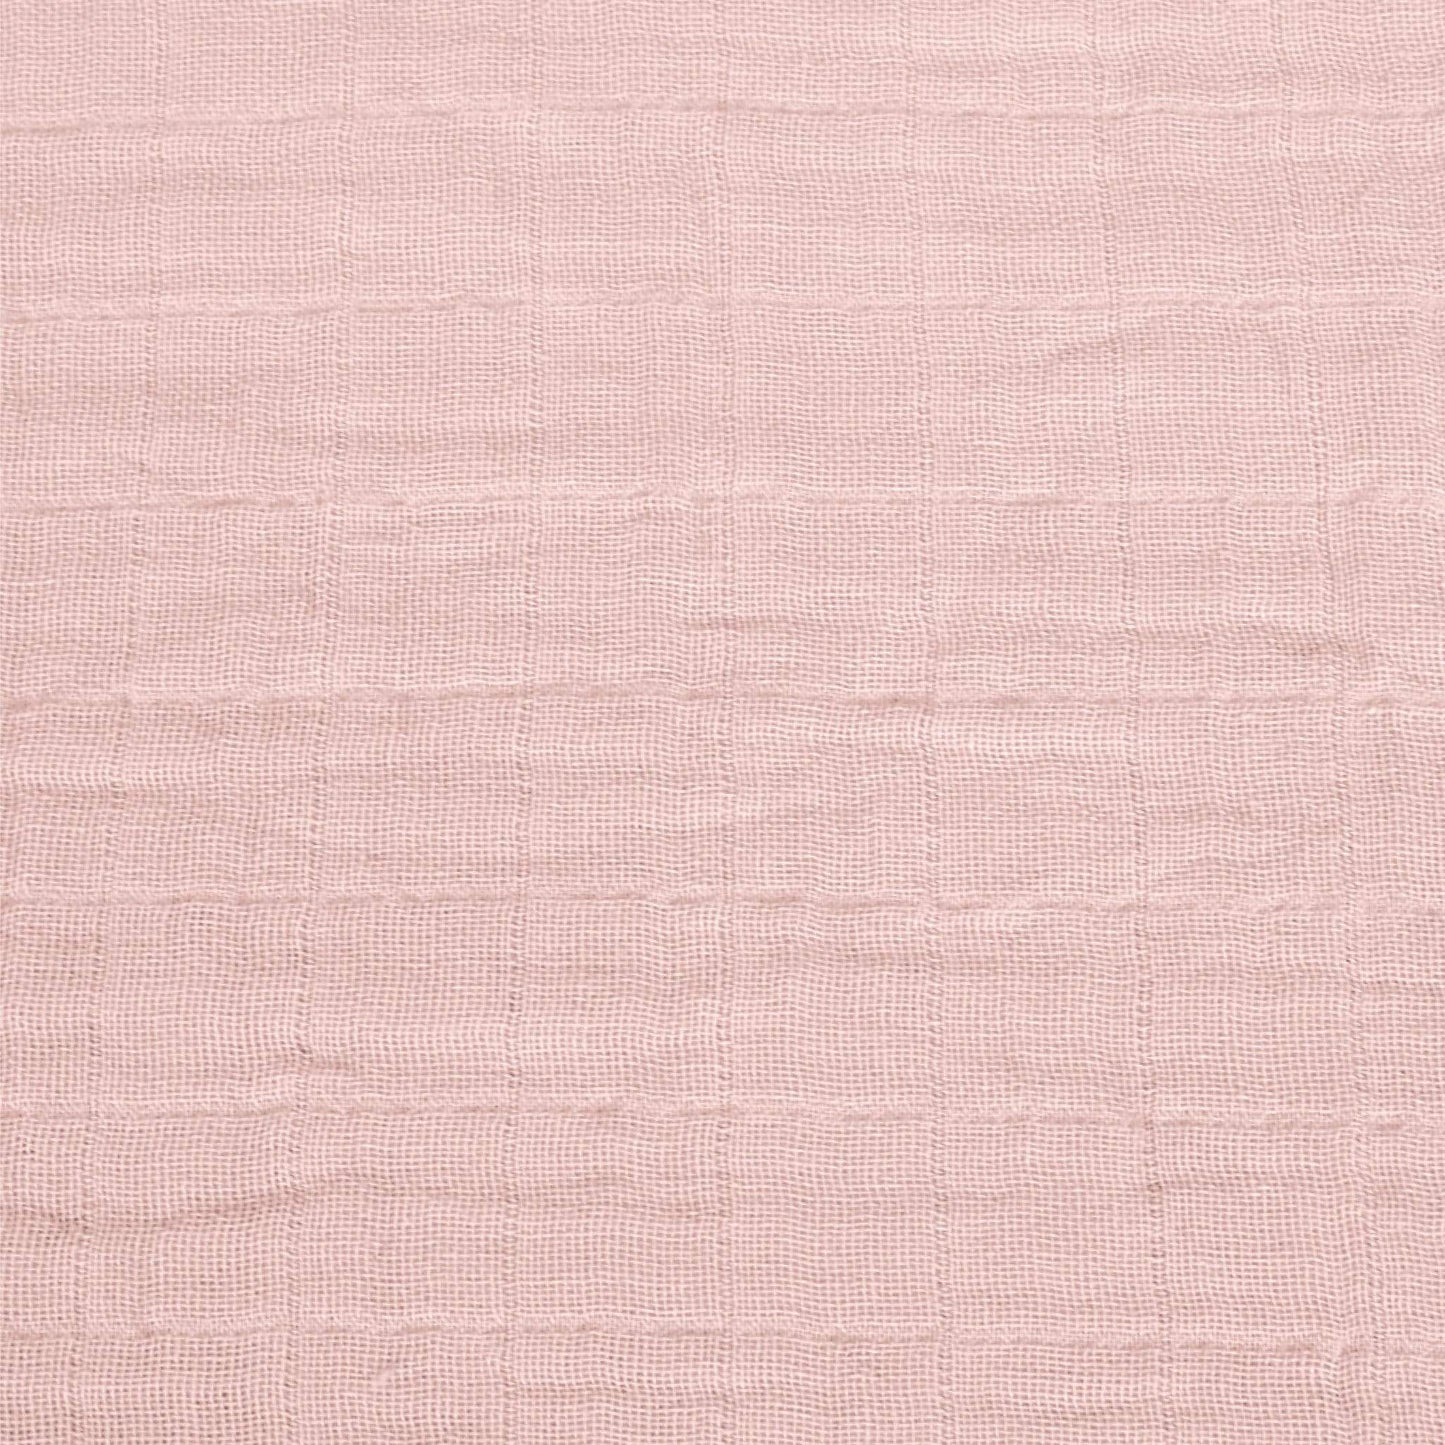 Cotton muslin change pad cover - pink